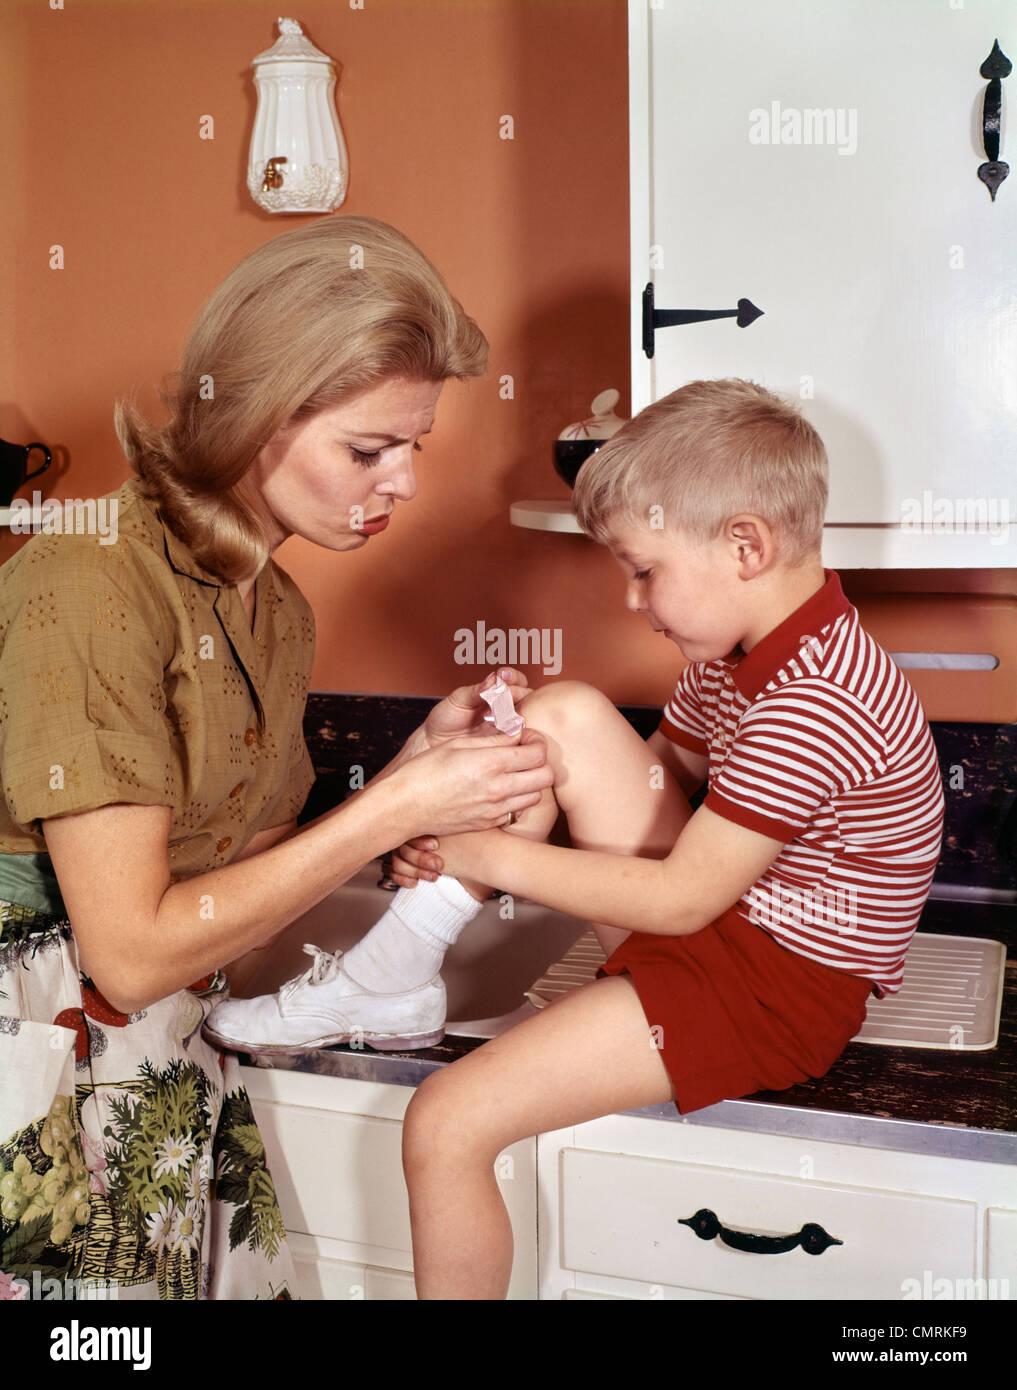 MOTHER GIVING FIRST-AID PUTTING BAND-AID ON KNEE OF SON IN KITCHEN 1960s Stock Photo